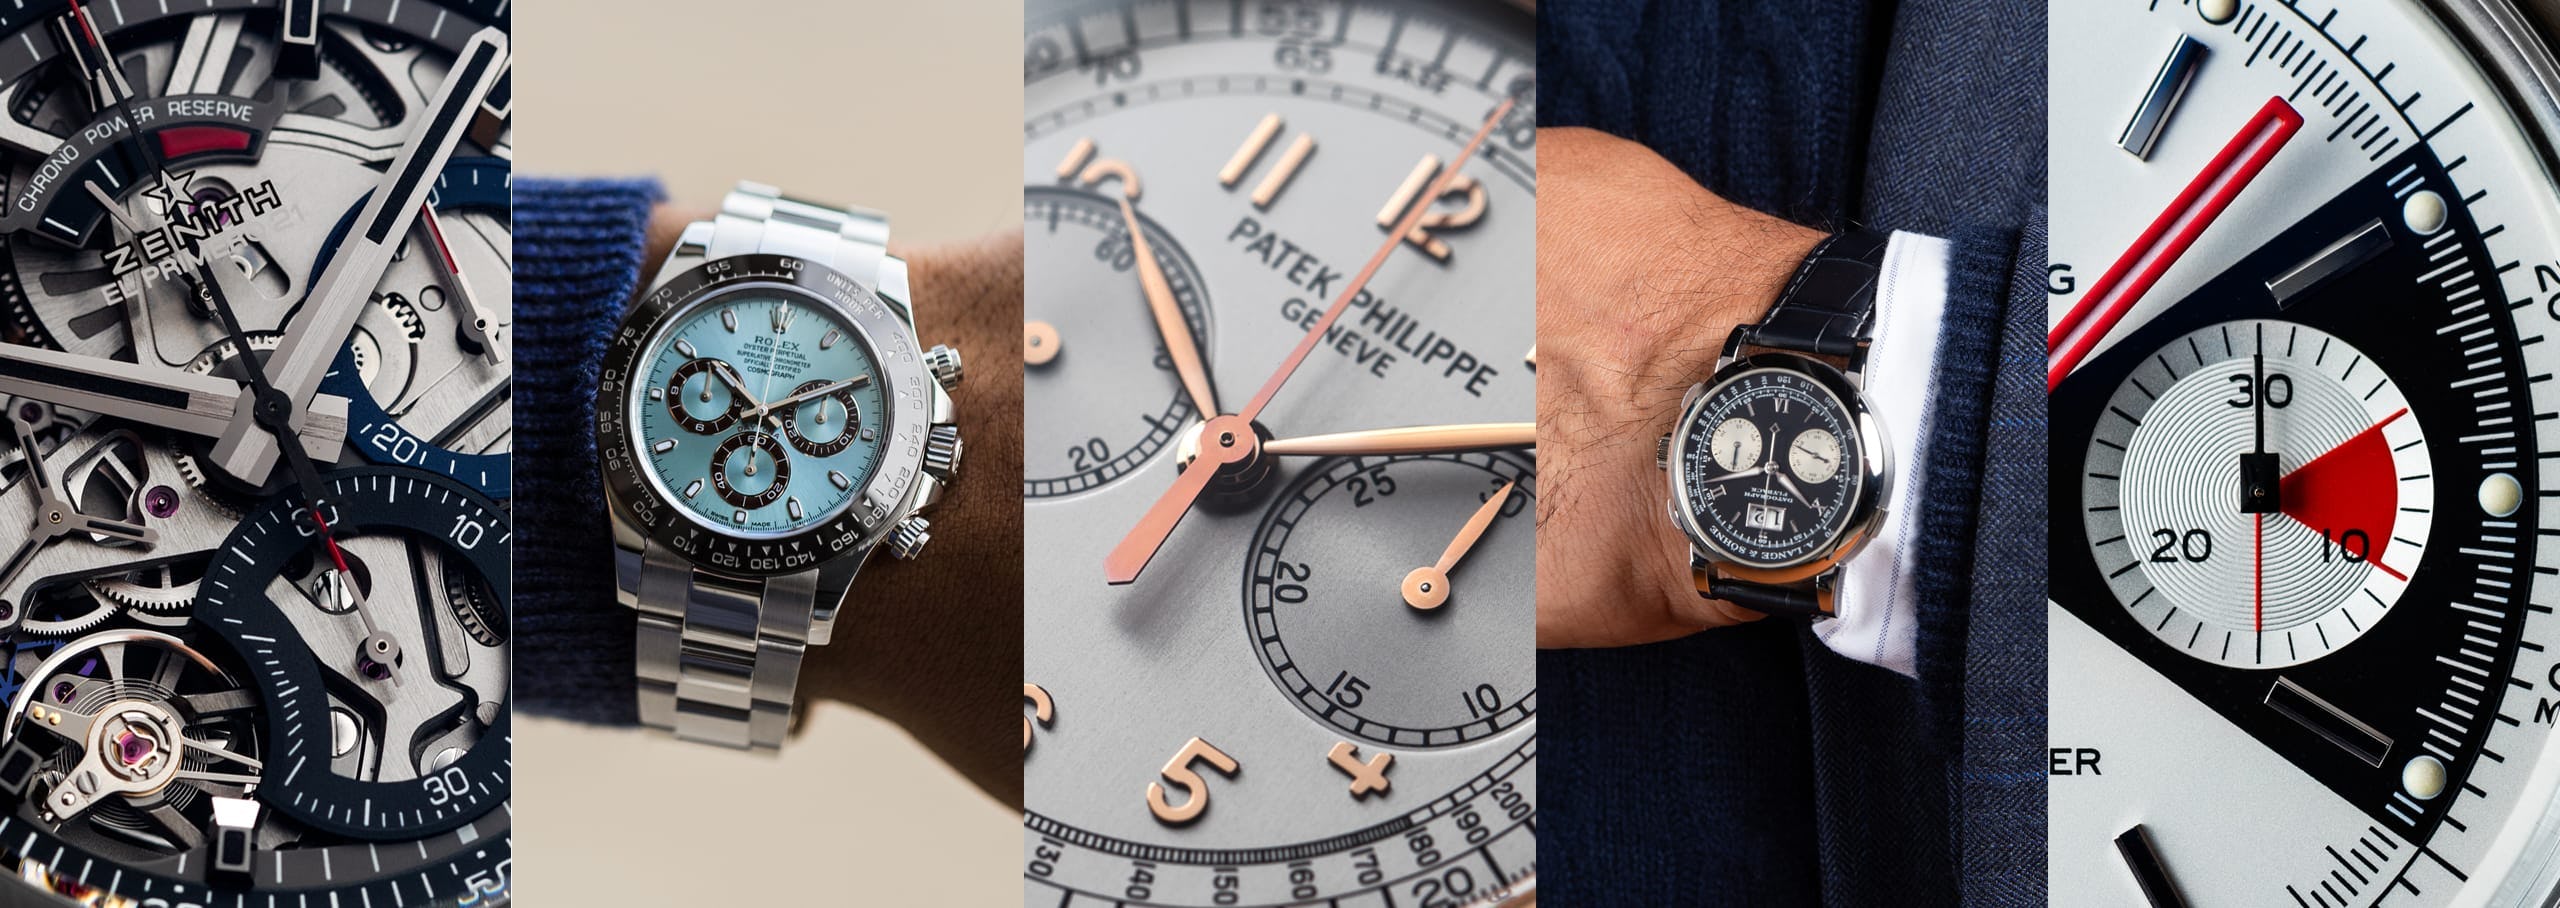 Best Of Chronographs: Timing The Last of 2020